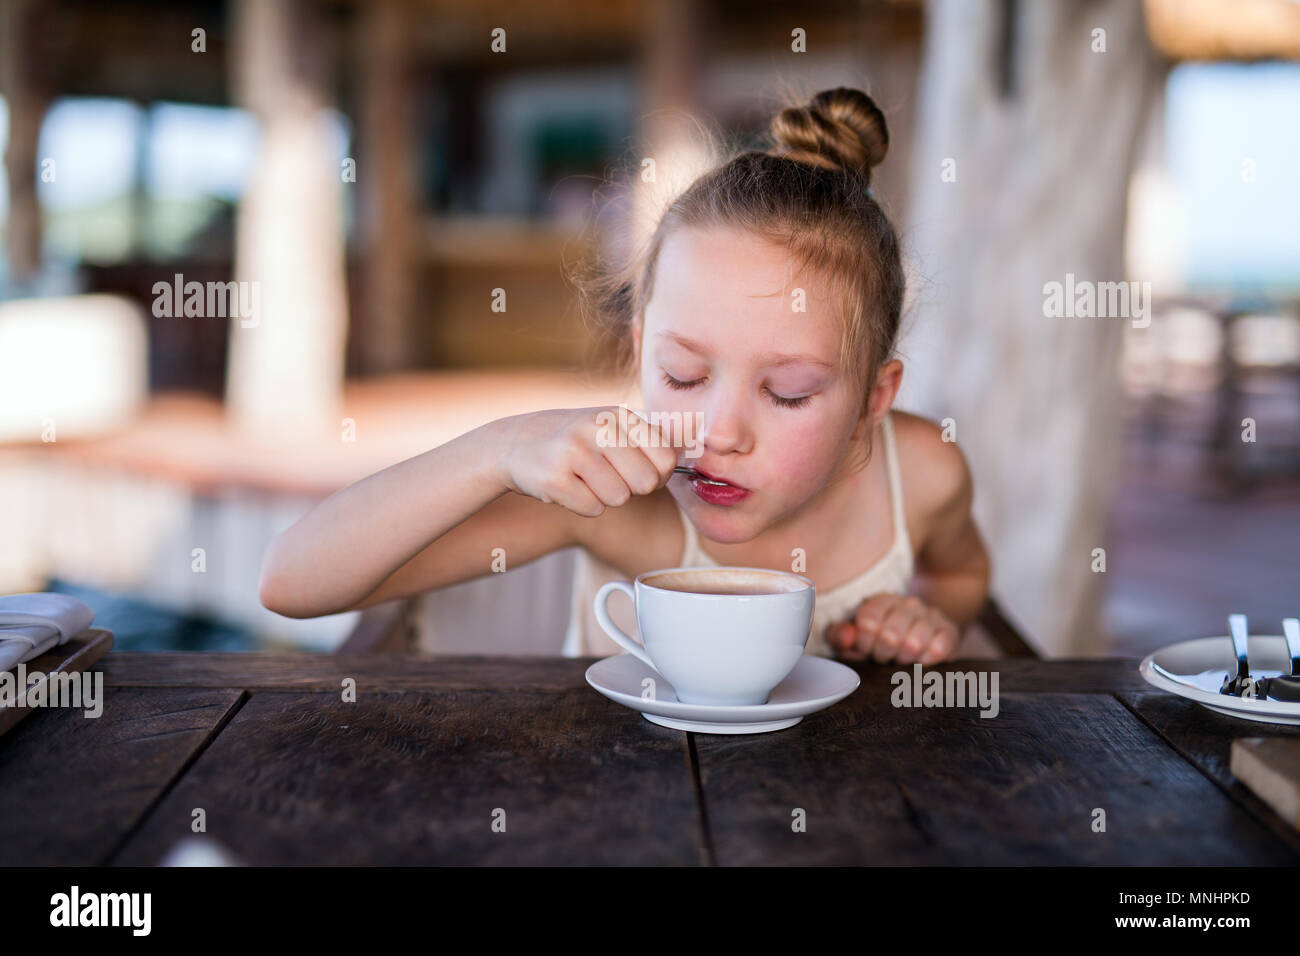 Adorable little girl in restaurant drinking hot chocolate Stock Photo